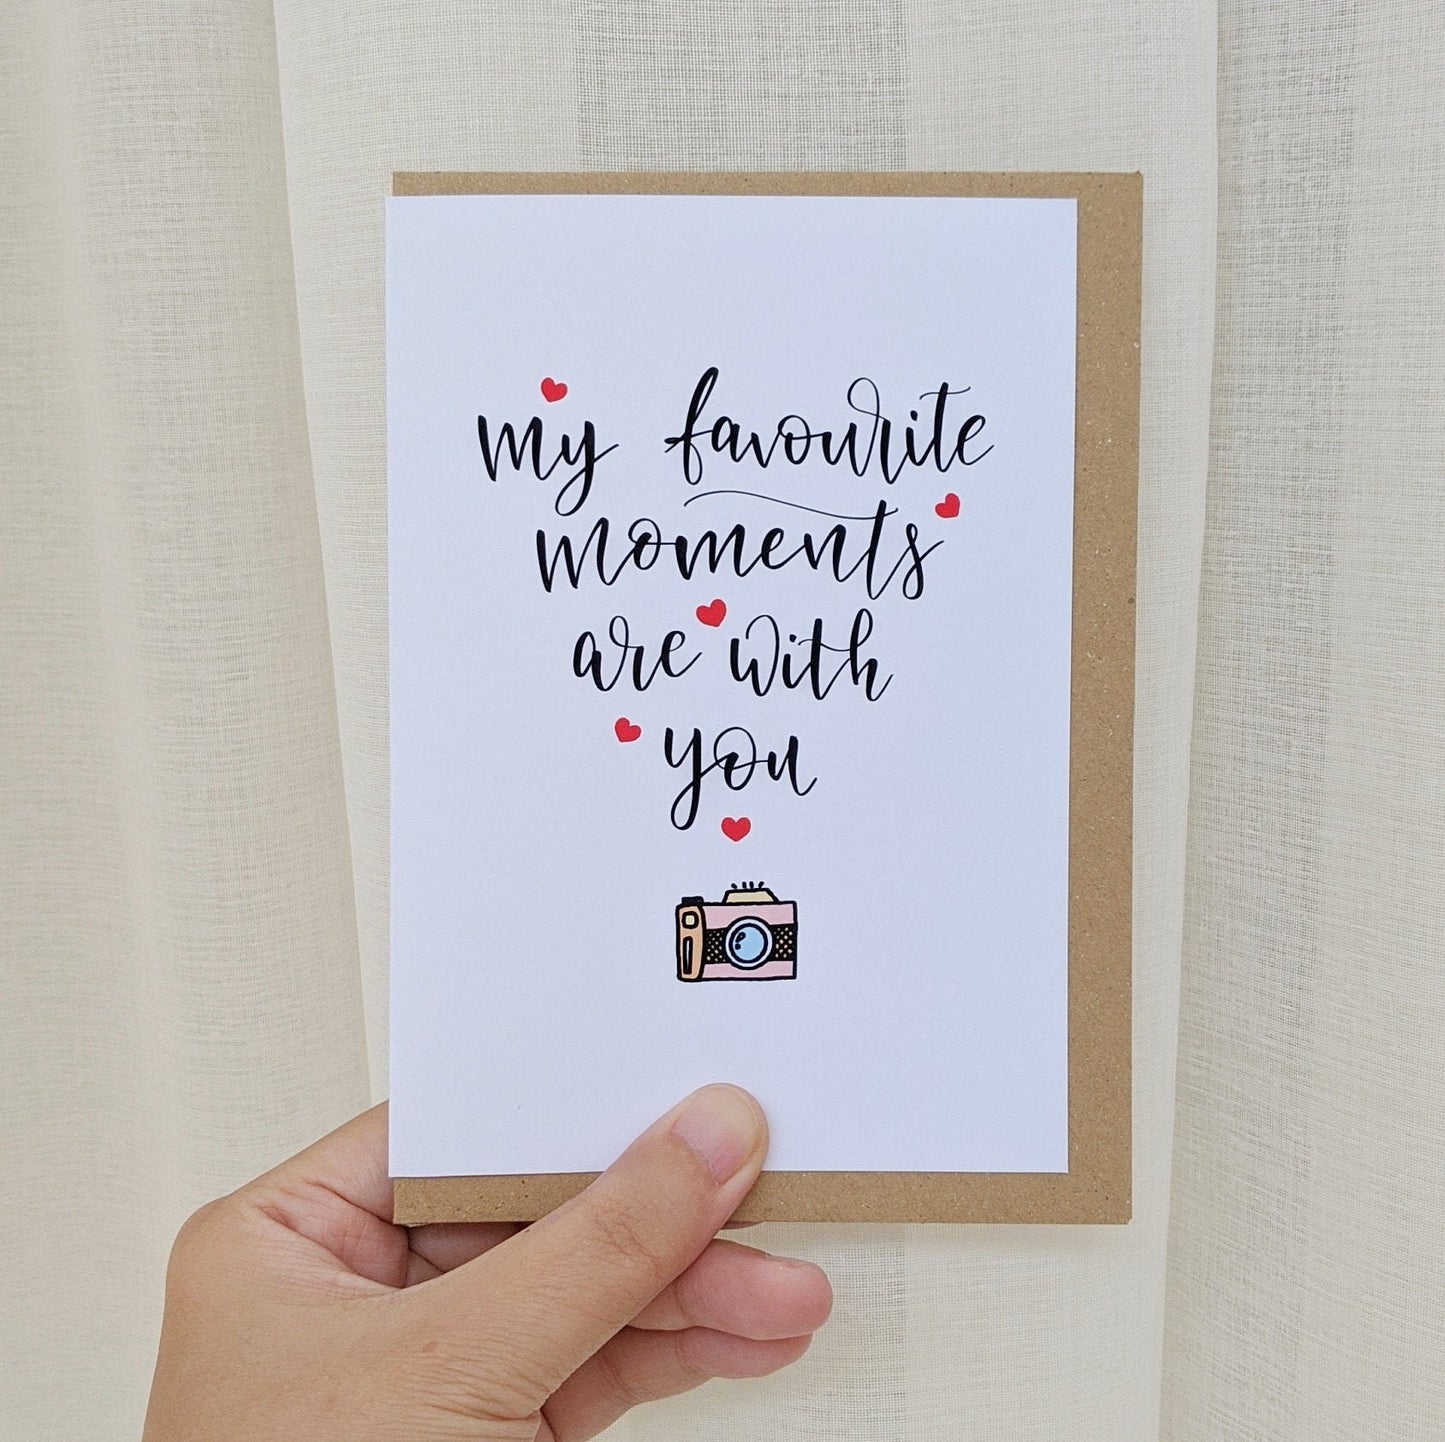 Greeting card held by hand with lettering "my favourite moments are with you" surrounded by a small scatter of love hearts and illustration of camera at the bottom